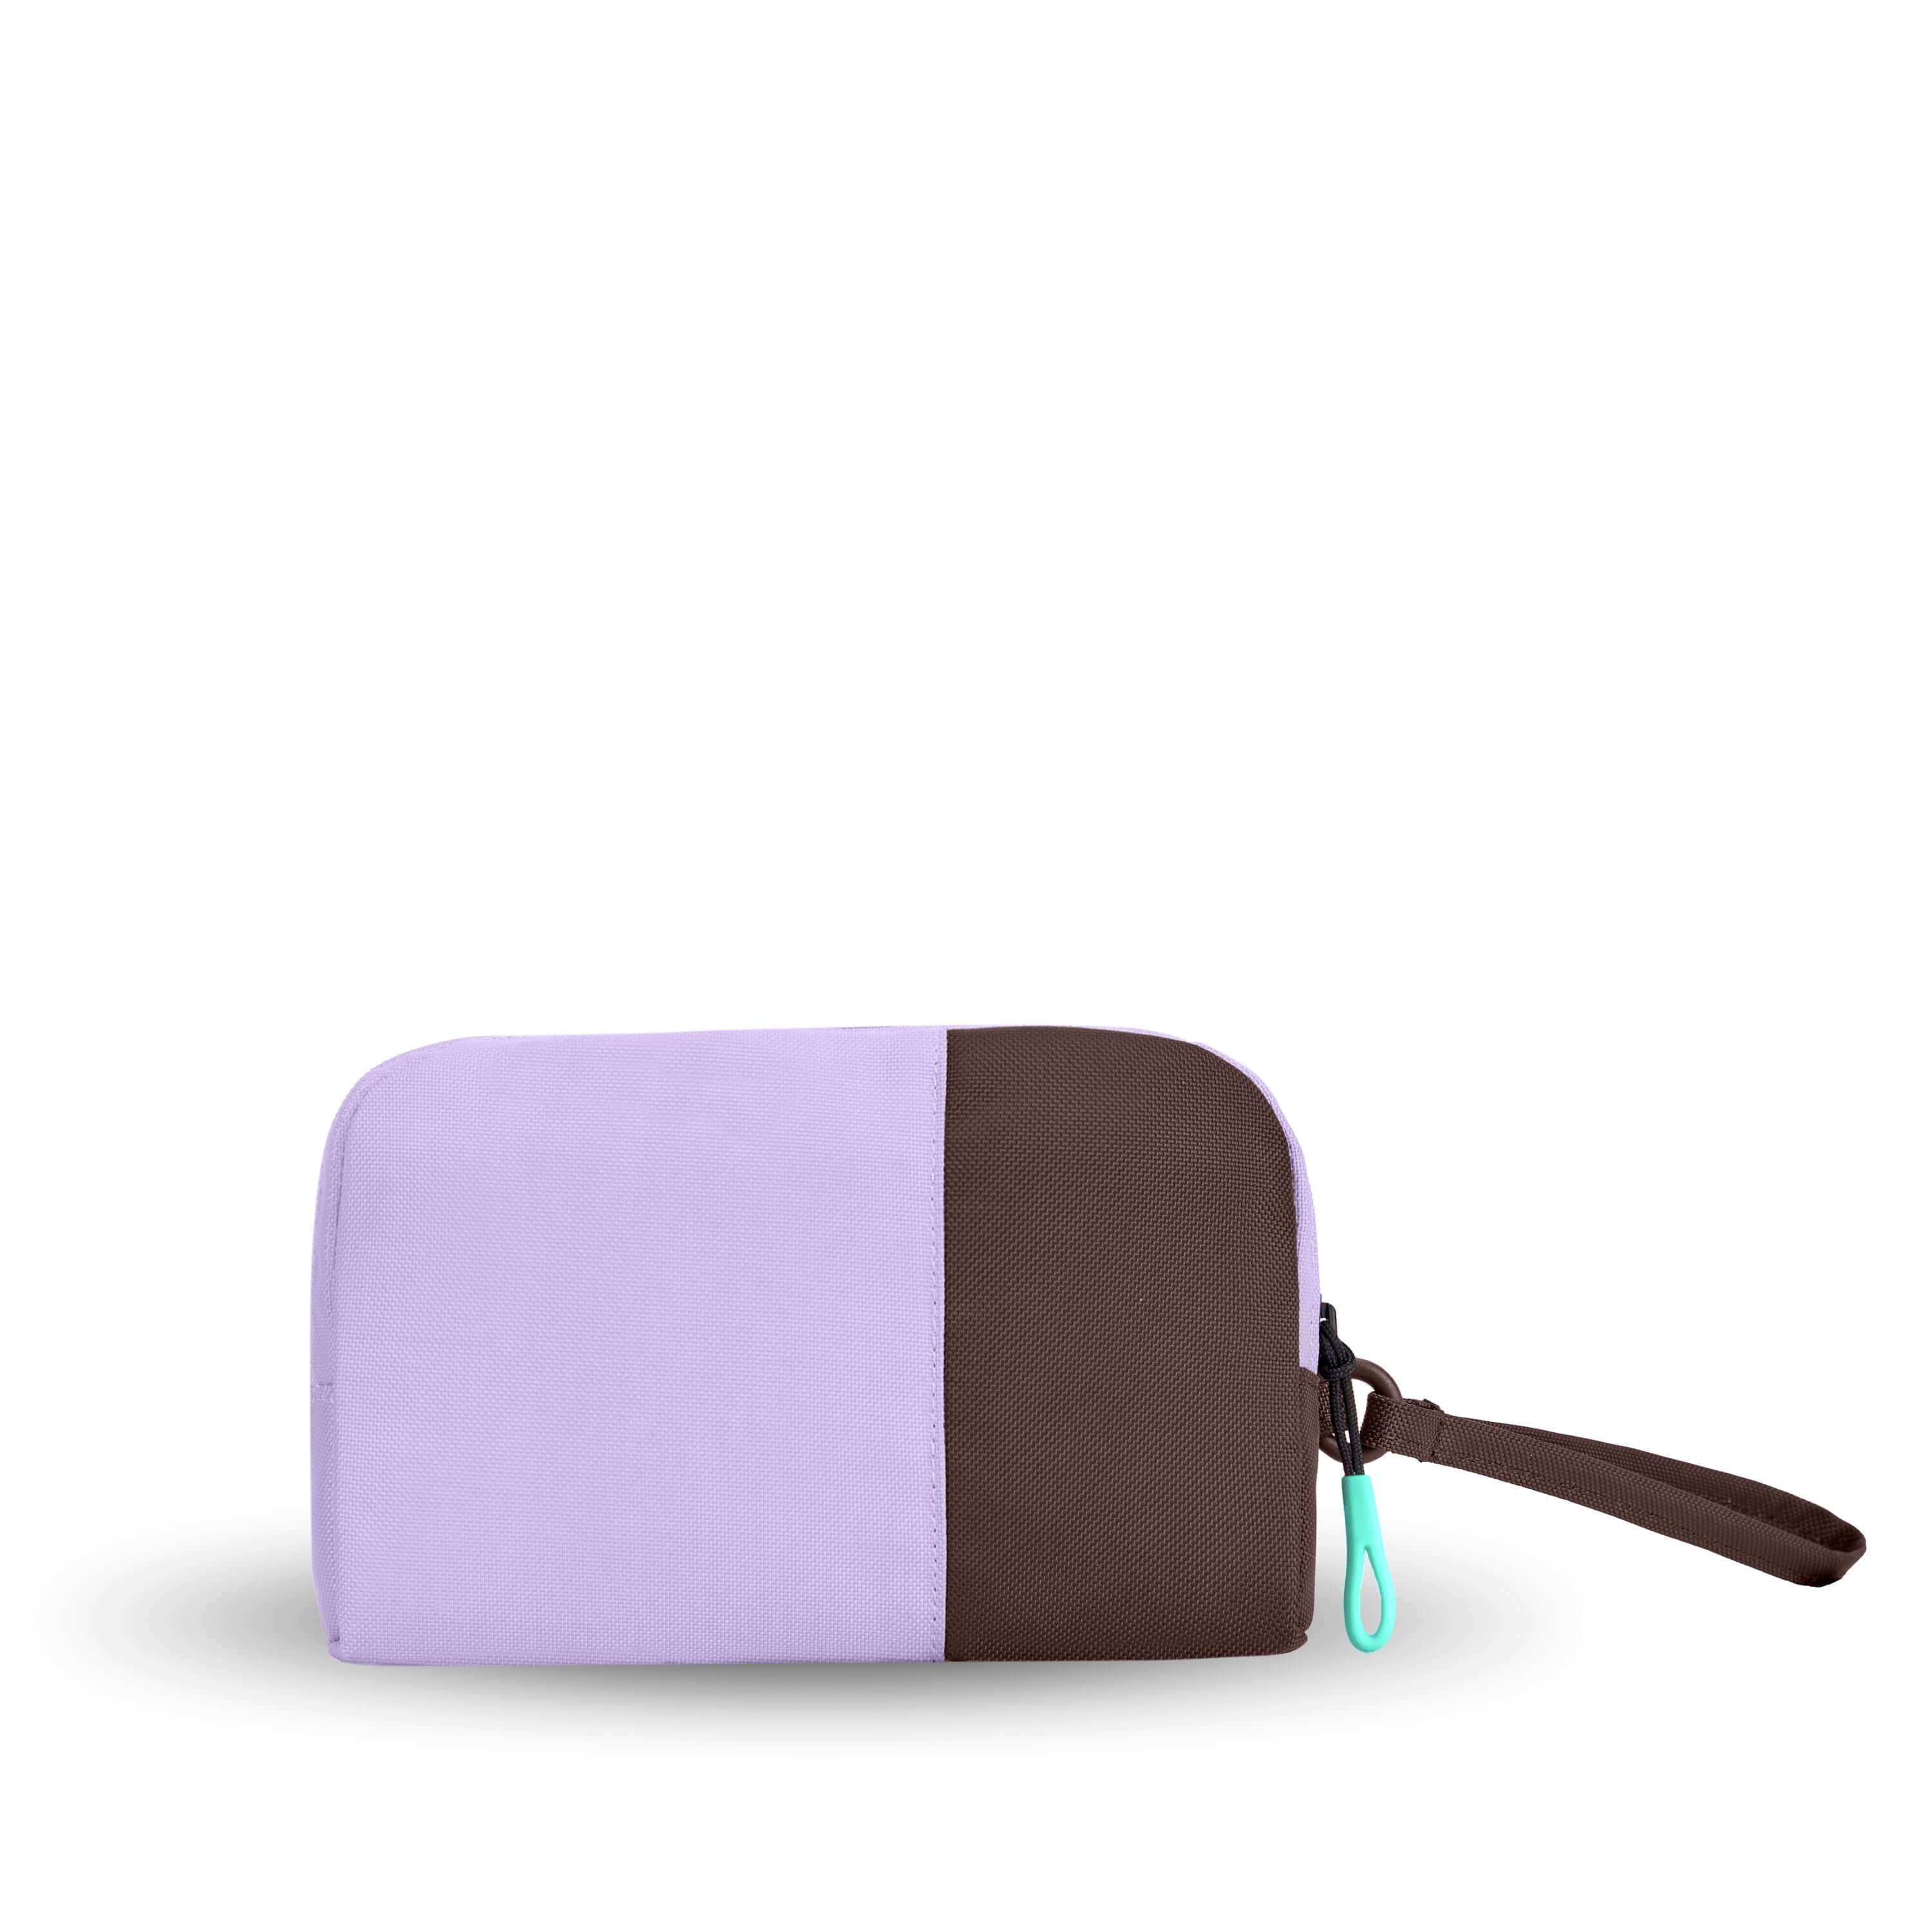 Back view of Sherpani travel accessory, the Jolie in Lavender, in medium size. The pouch is two-toned in lavender and brown. It features a brown wristlet strap and an easy-pull zipper accented in aqua.